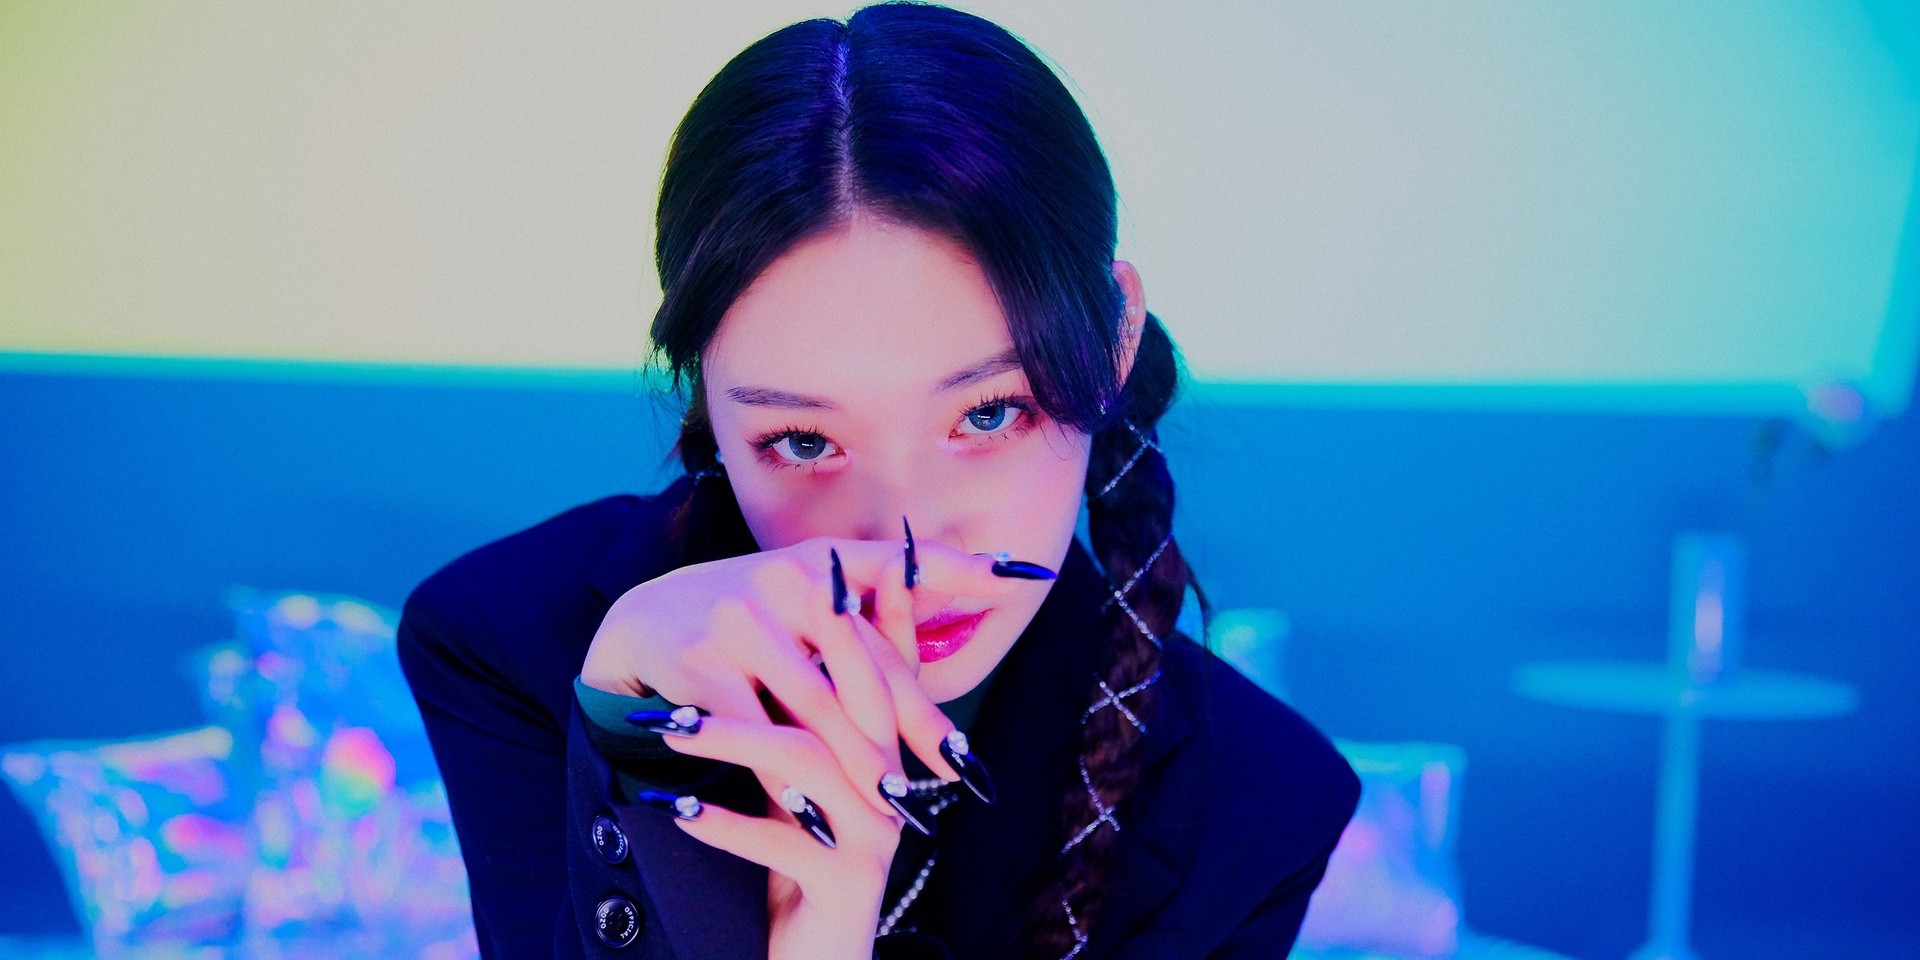 CHUNG HA on overcoming a tough year and drawing strength from her fans through new album: "My fans are my biggest querencia"